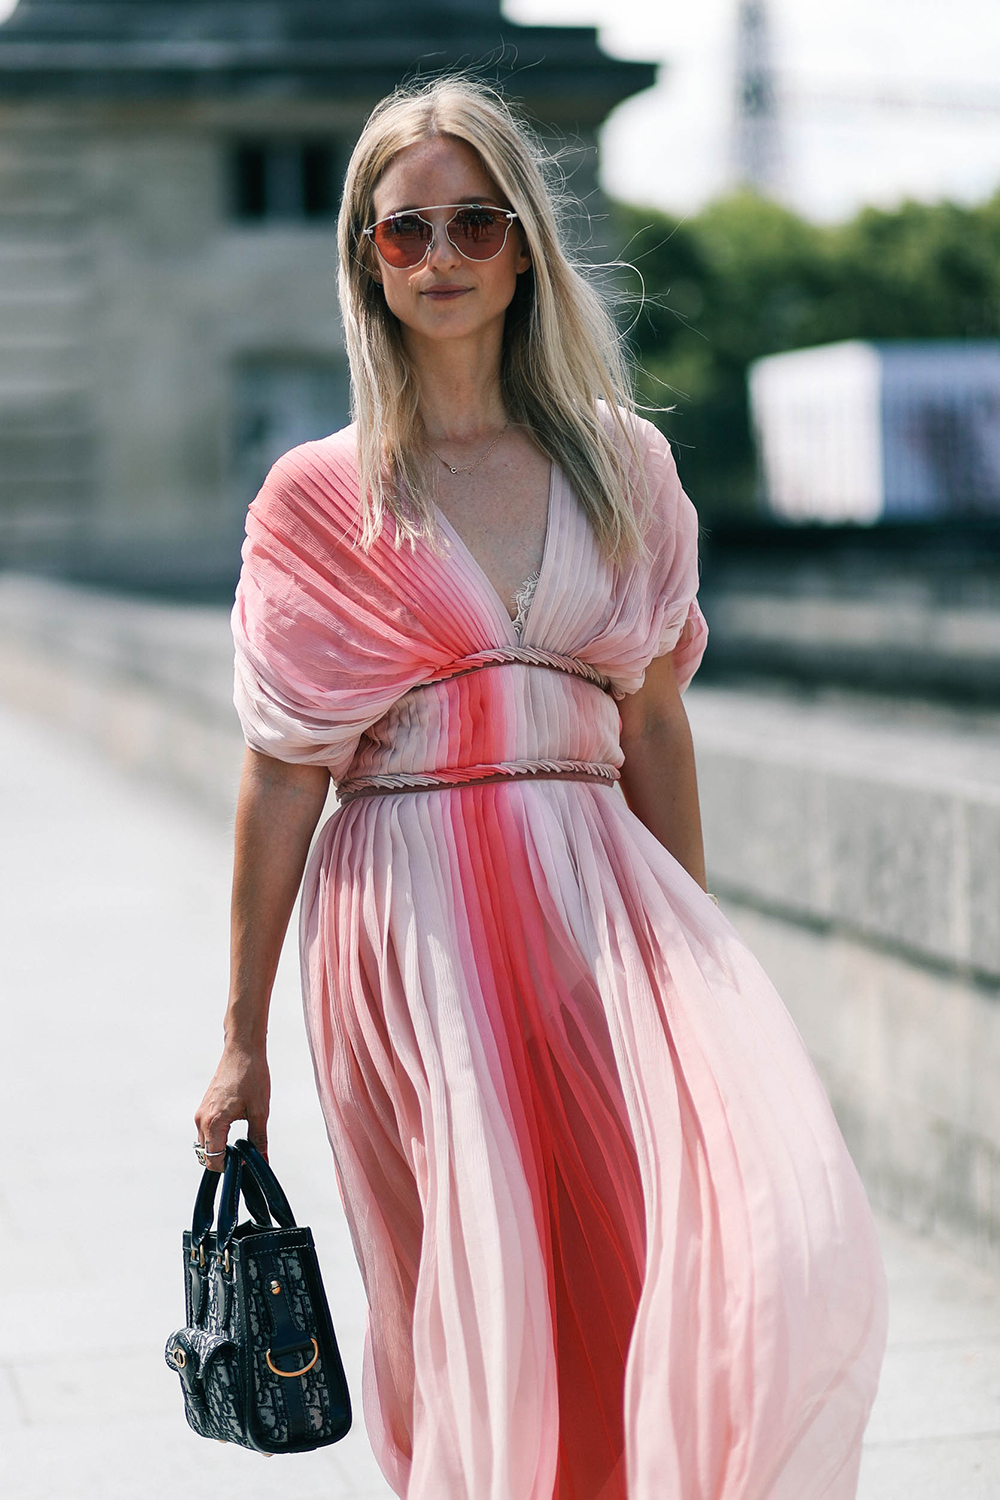 Charlotte Groeneveld Thefashionguitar attends the Dior Haute Couture show in Paris